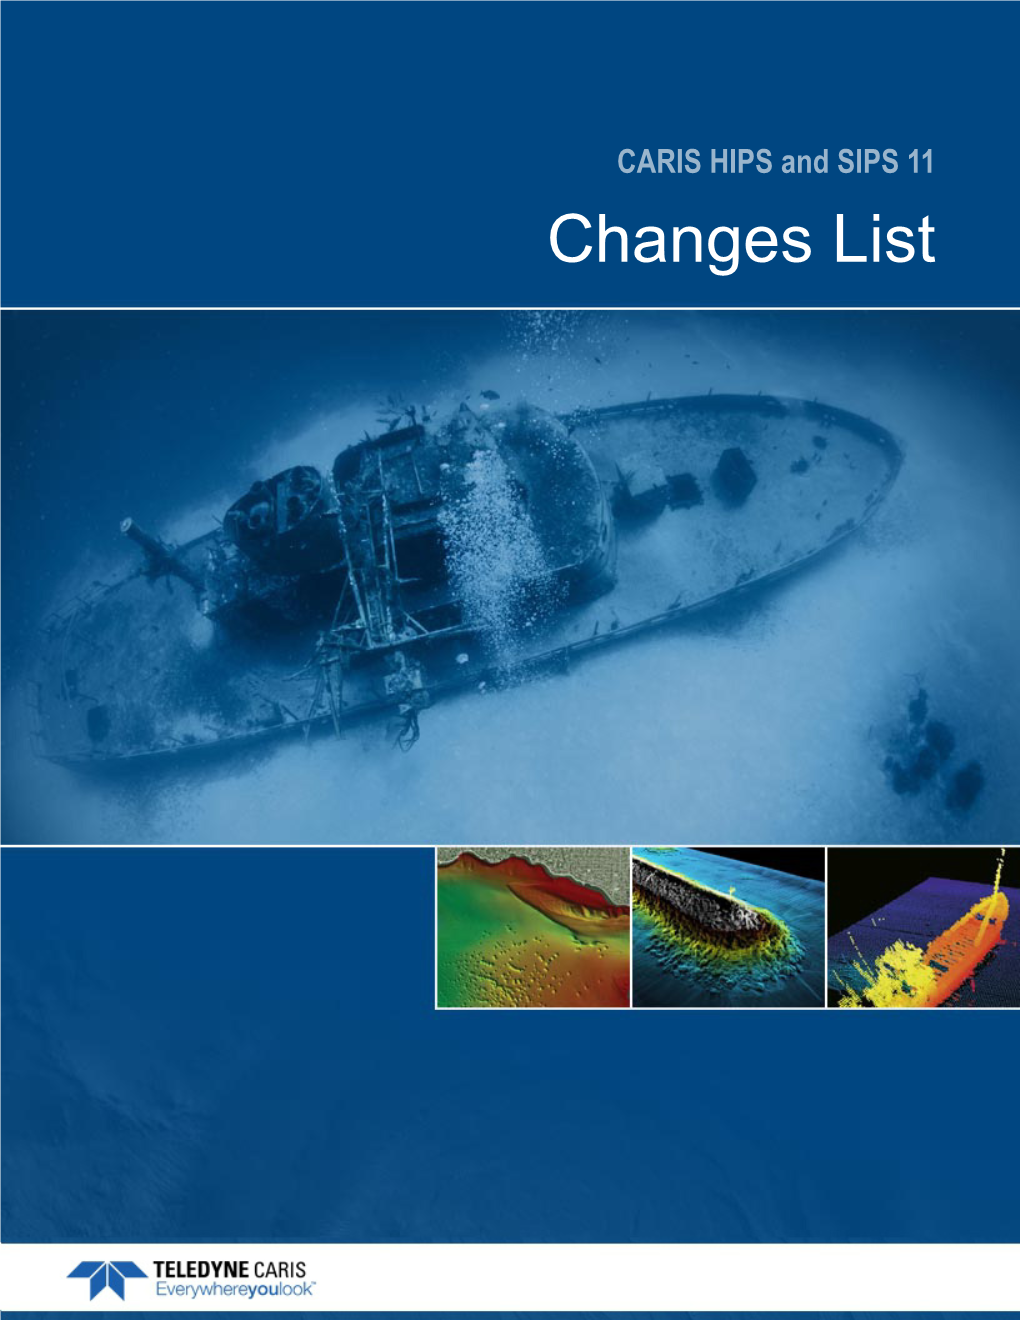 CARIS HIPS and SIPS Changes List.Book